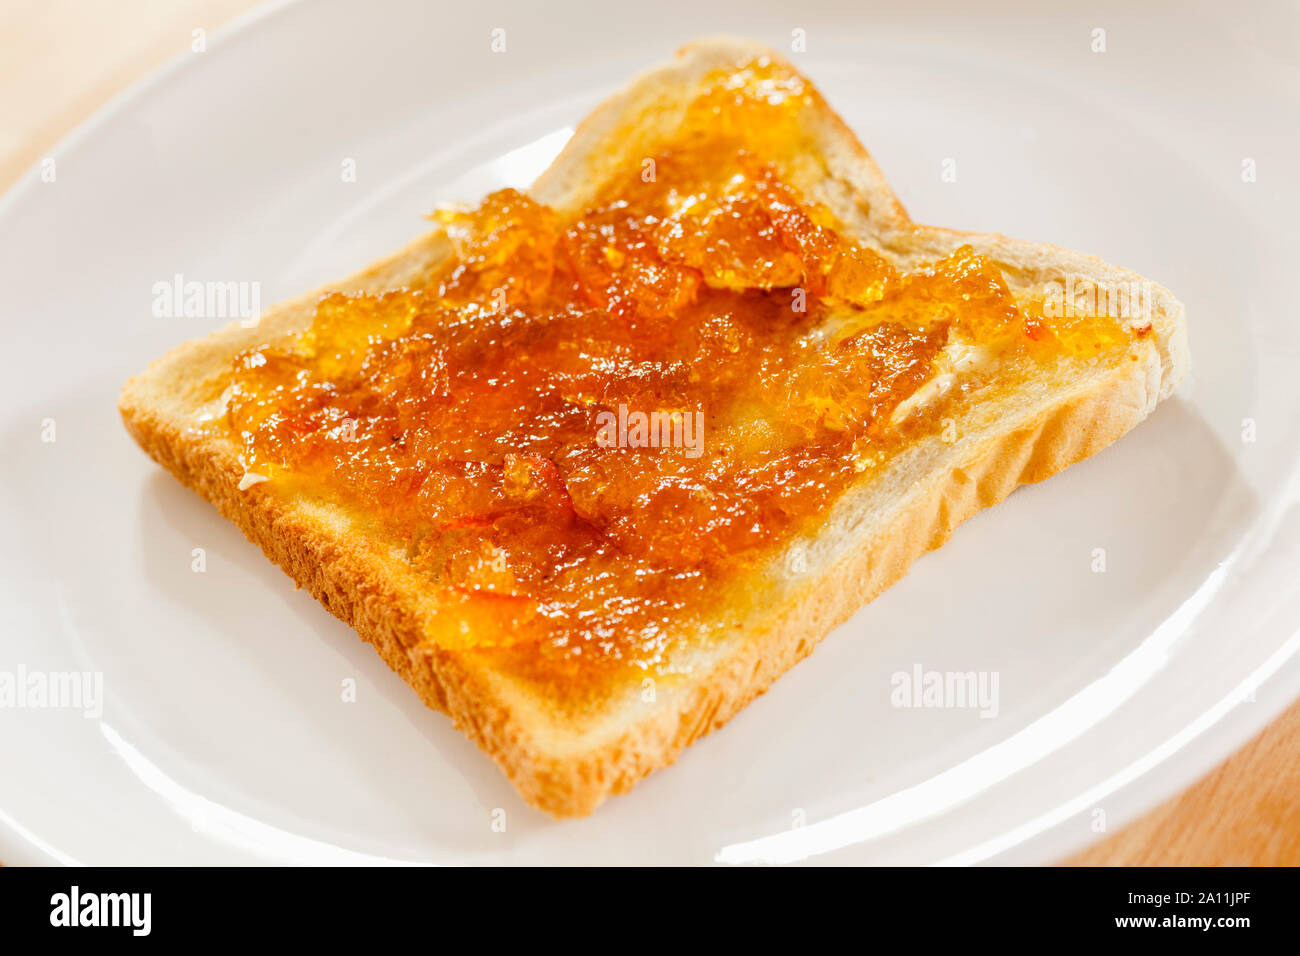 Toast and marmalade on a white plate Stock Photo